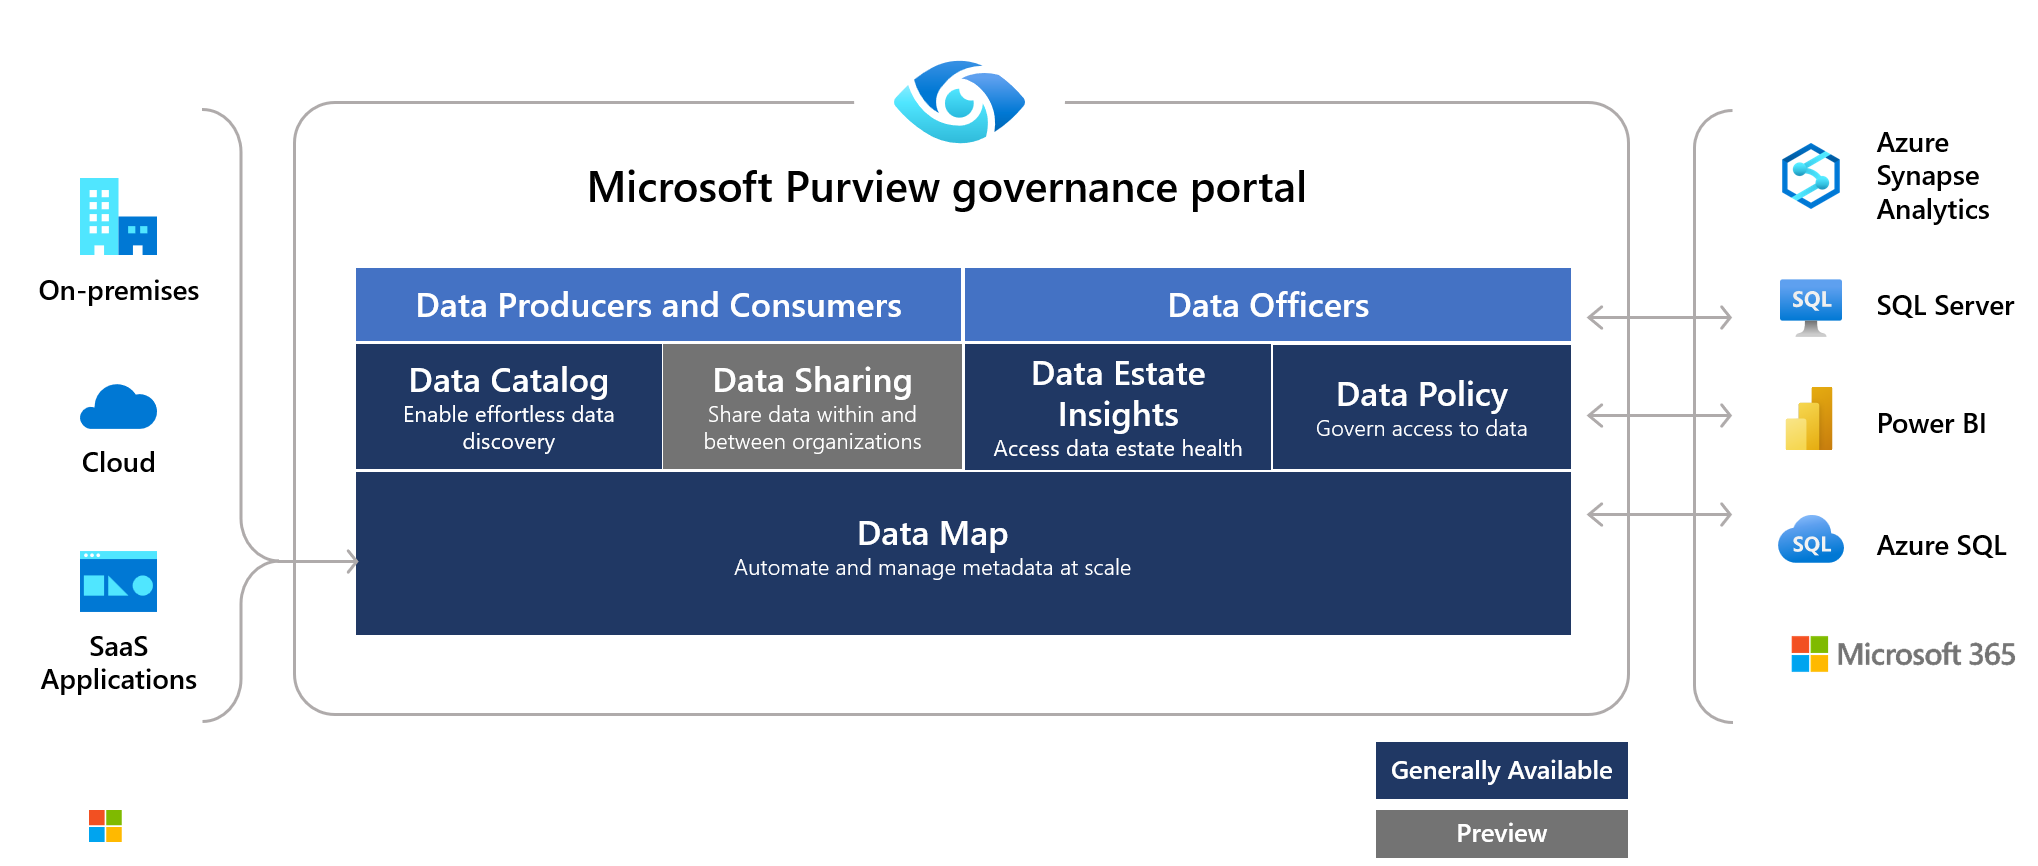 https://learn.microsoft.com/en-us/purview/media/overview/high-level-overview-large.png